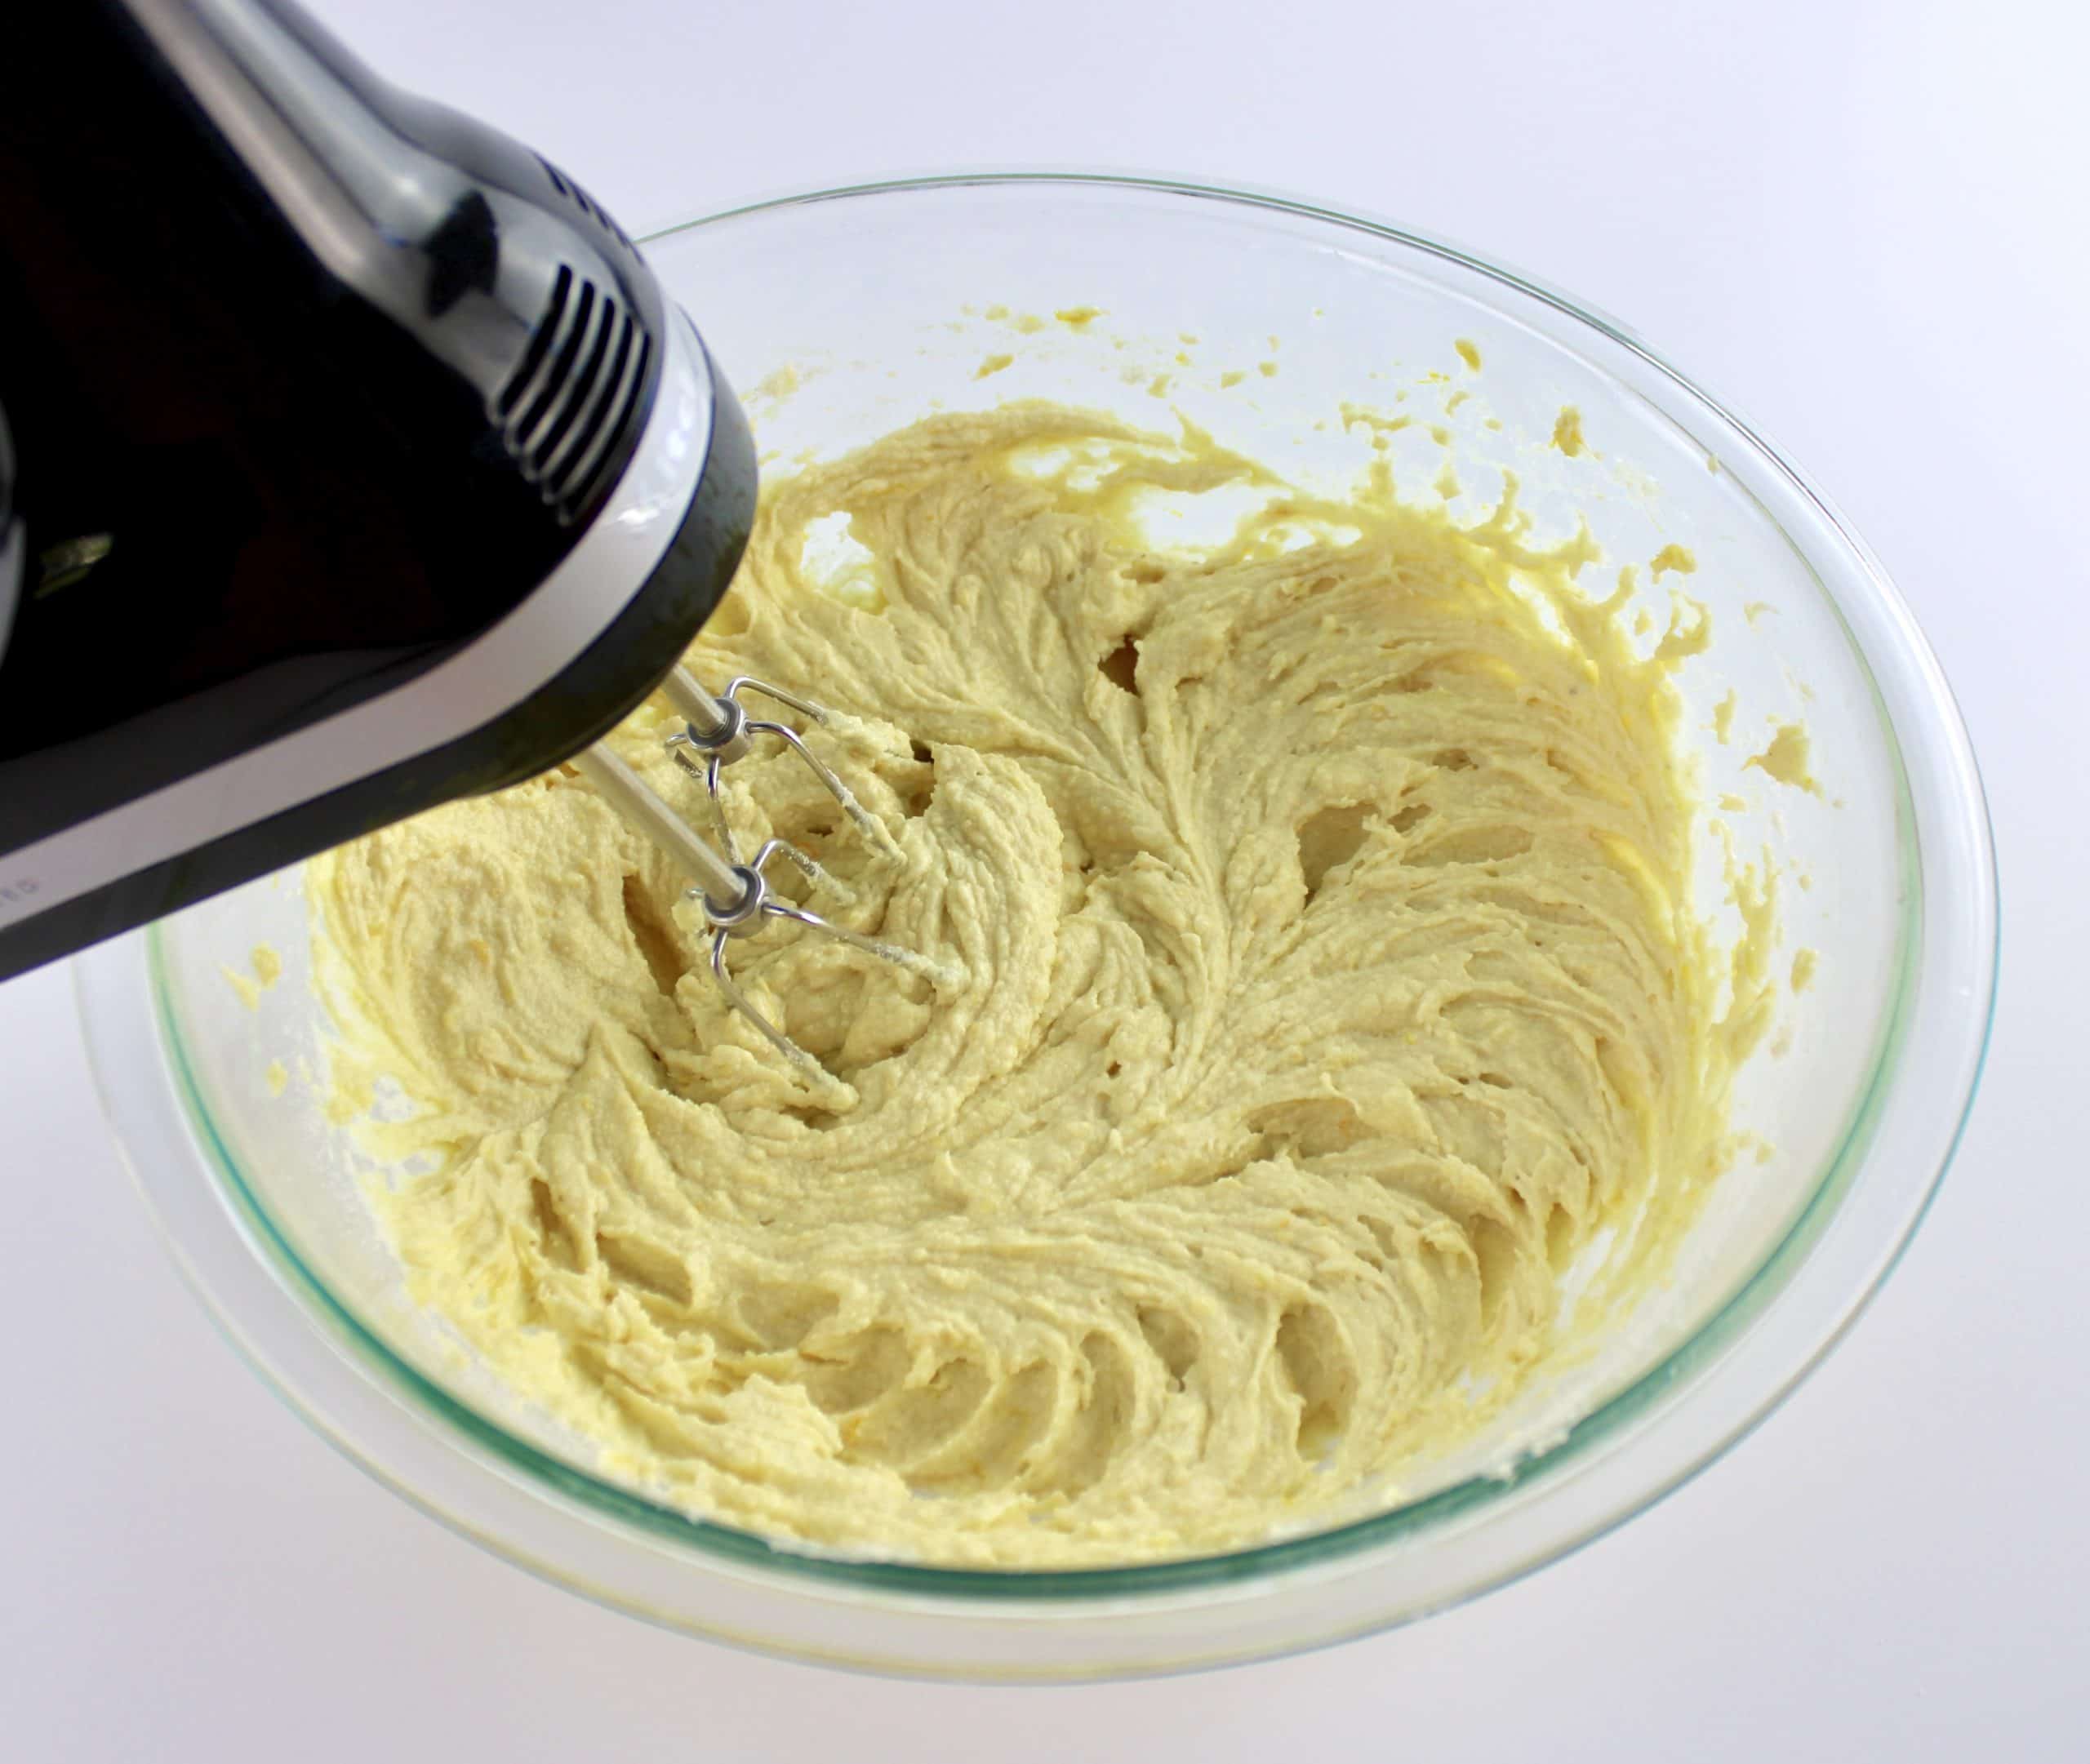 Orange pound cake batter being mixed with hand mixer